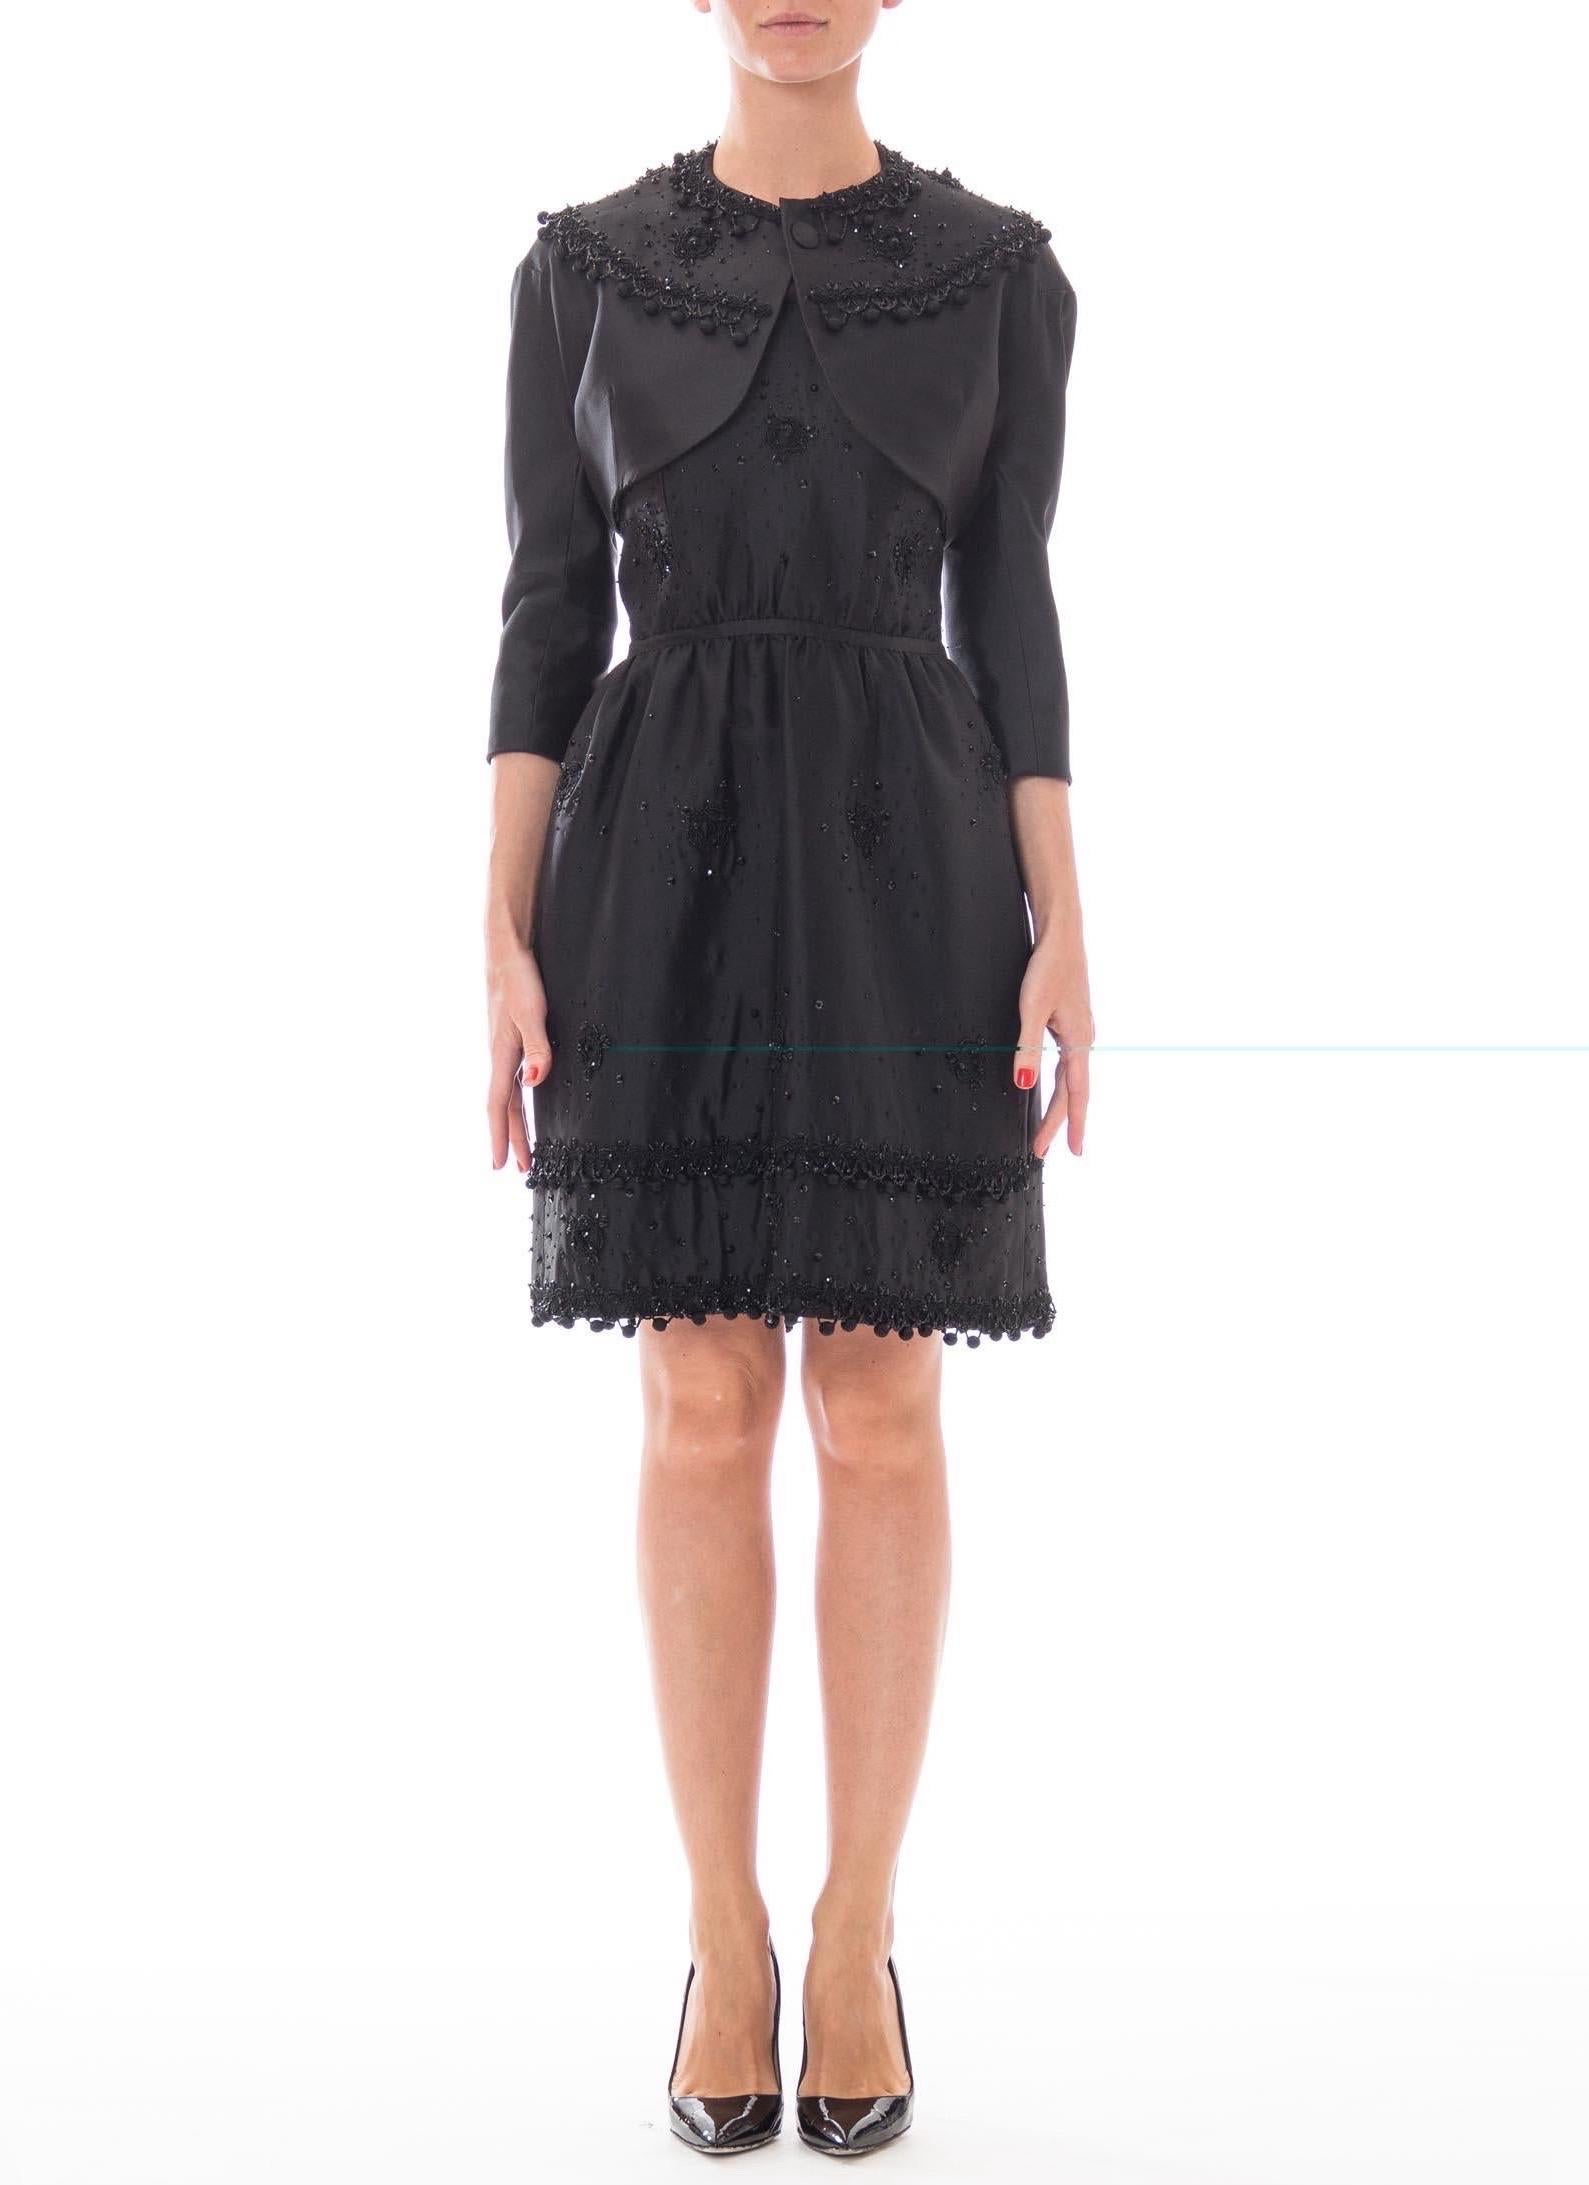 Exceptional quality, fully silk lined and hand finished. Very much in the Balenciaga Spanish style. MADELEINE DE RAUCH Black Haute Couture Silk Gazzar Passementrie Beaded Cocktail Dress With Cropped Bolero Jacket 